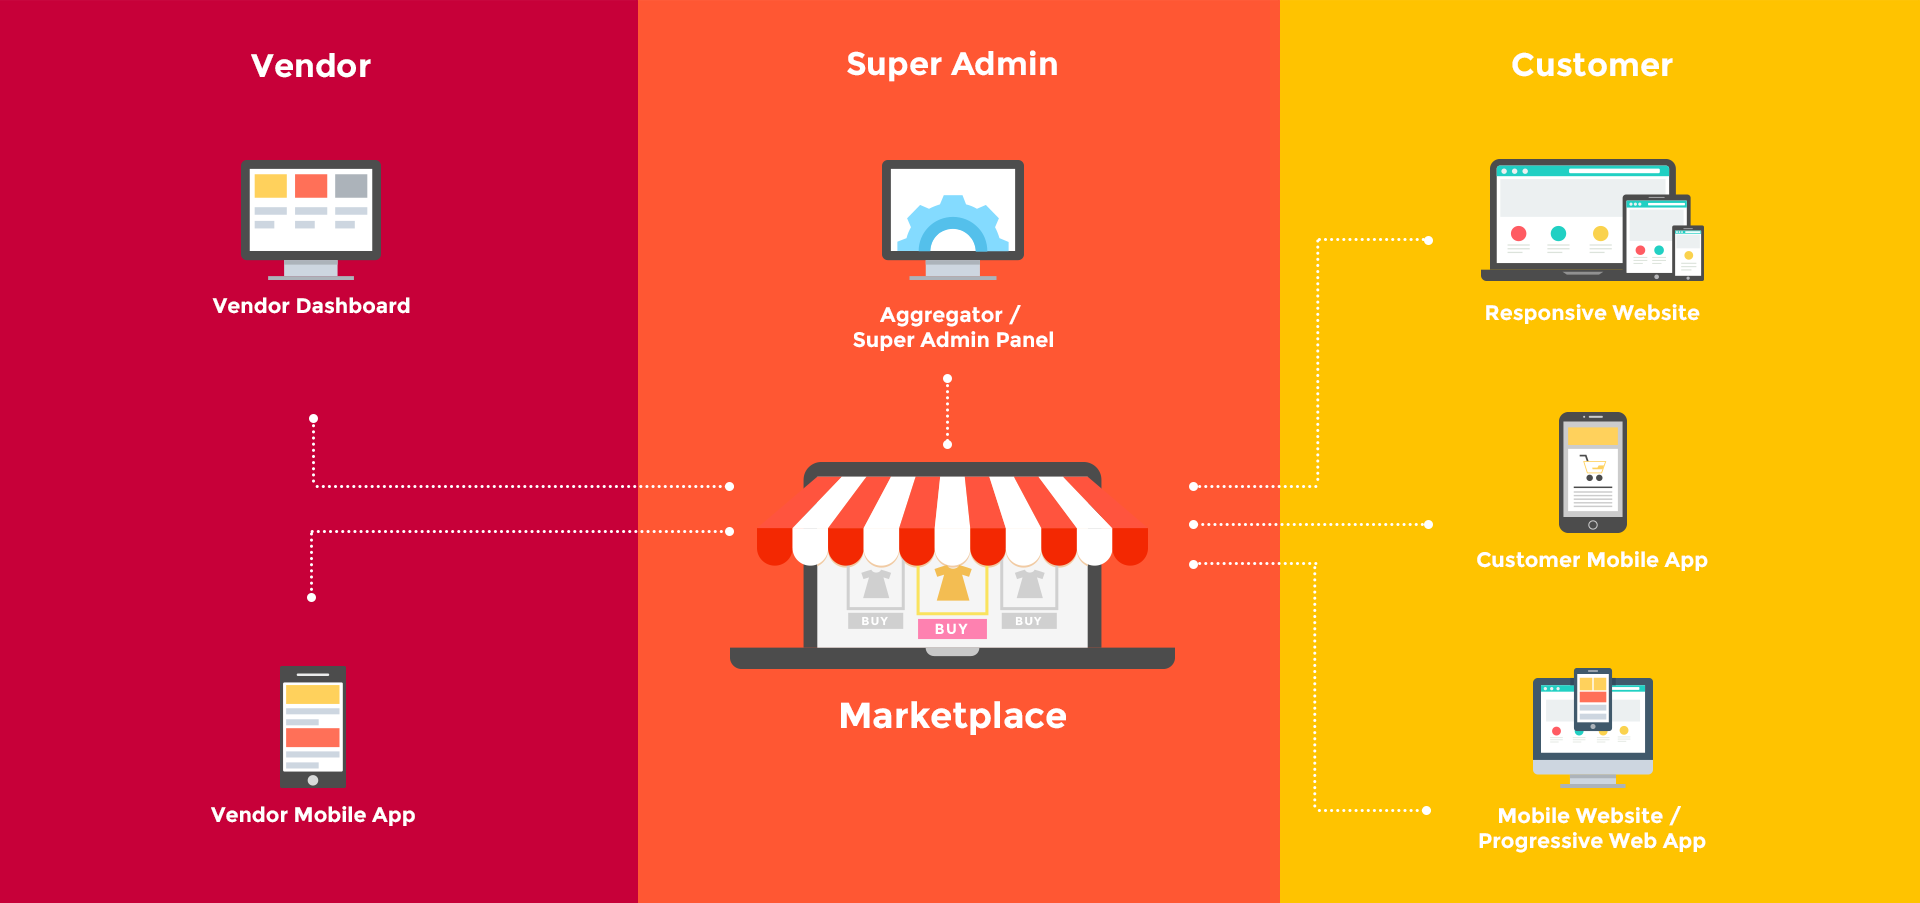 market-place-architecture - Magento Tutorial and Marketing ...